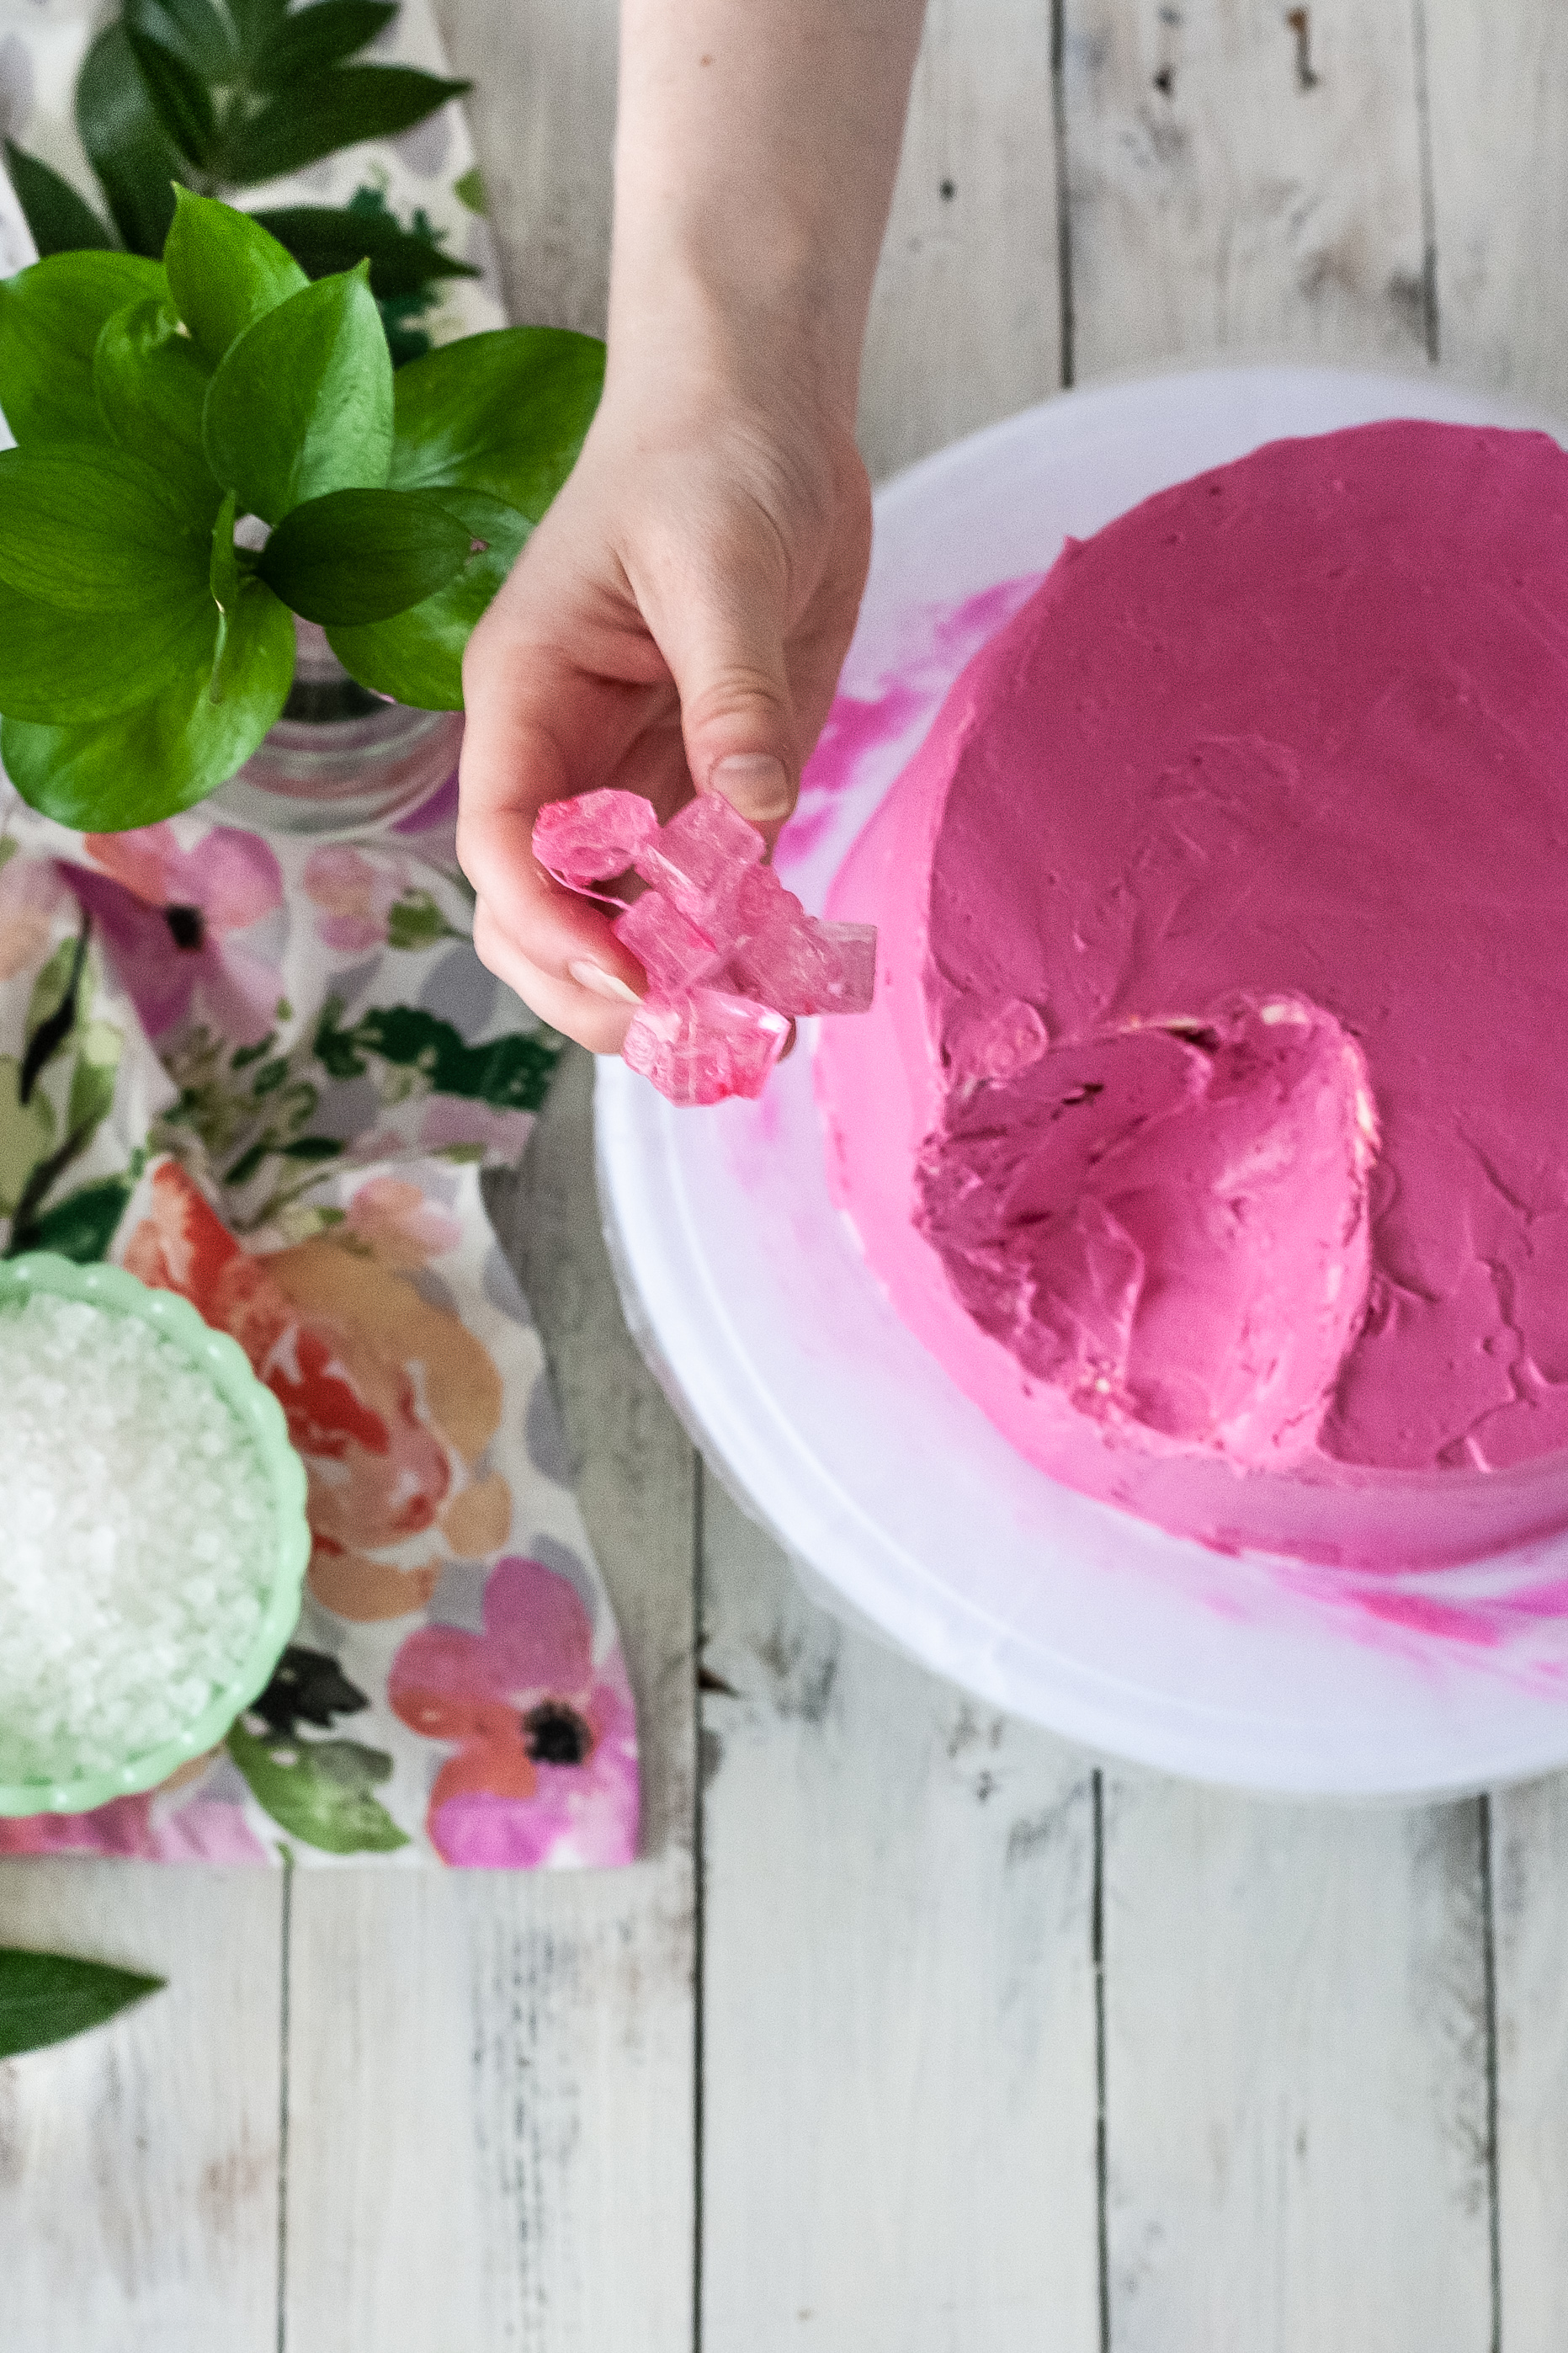 An approachable, step-by-step guide to making your own gorgeous geode cake at home! [ www.pedanticfoodie.com ]